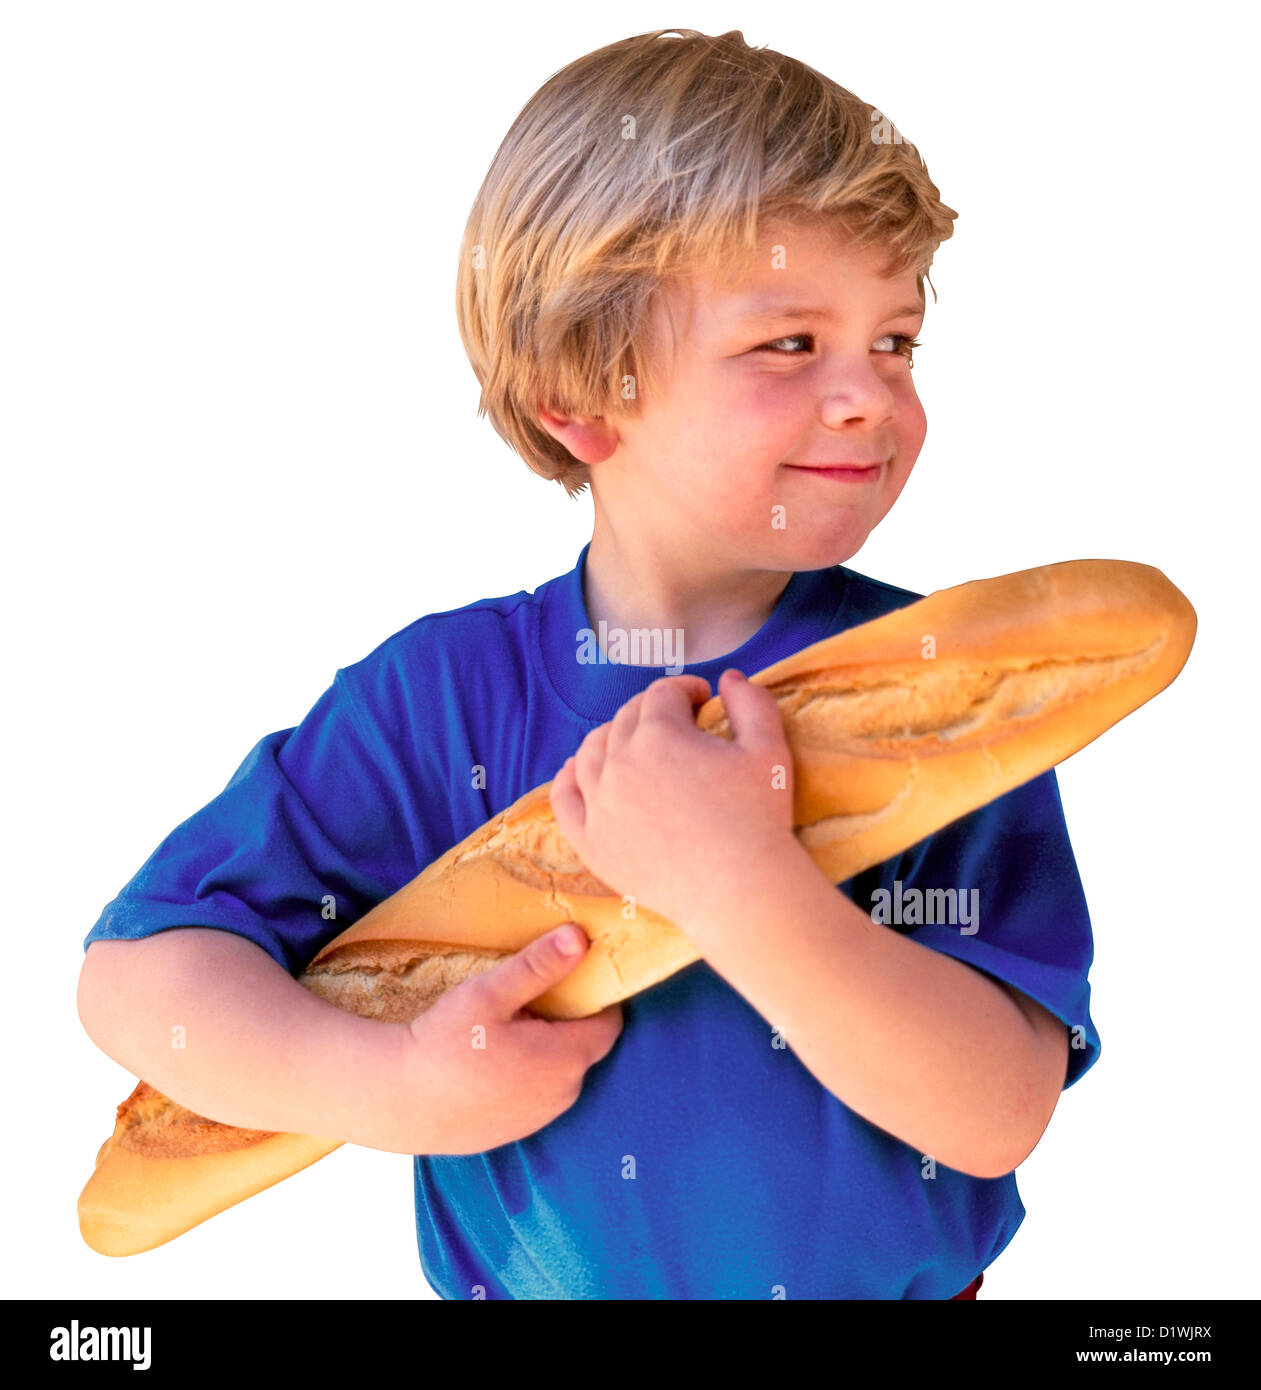 CUT OUT OF YOUNG BOY HOLDING FRENCH BREAD BAGUETTE Stock Photo